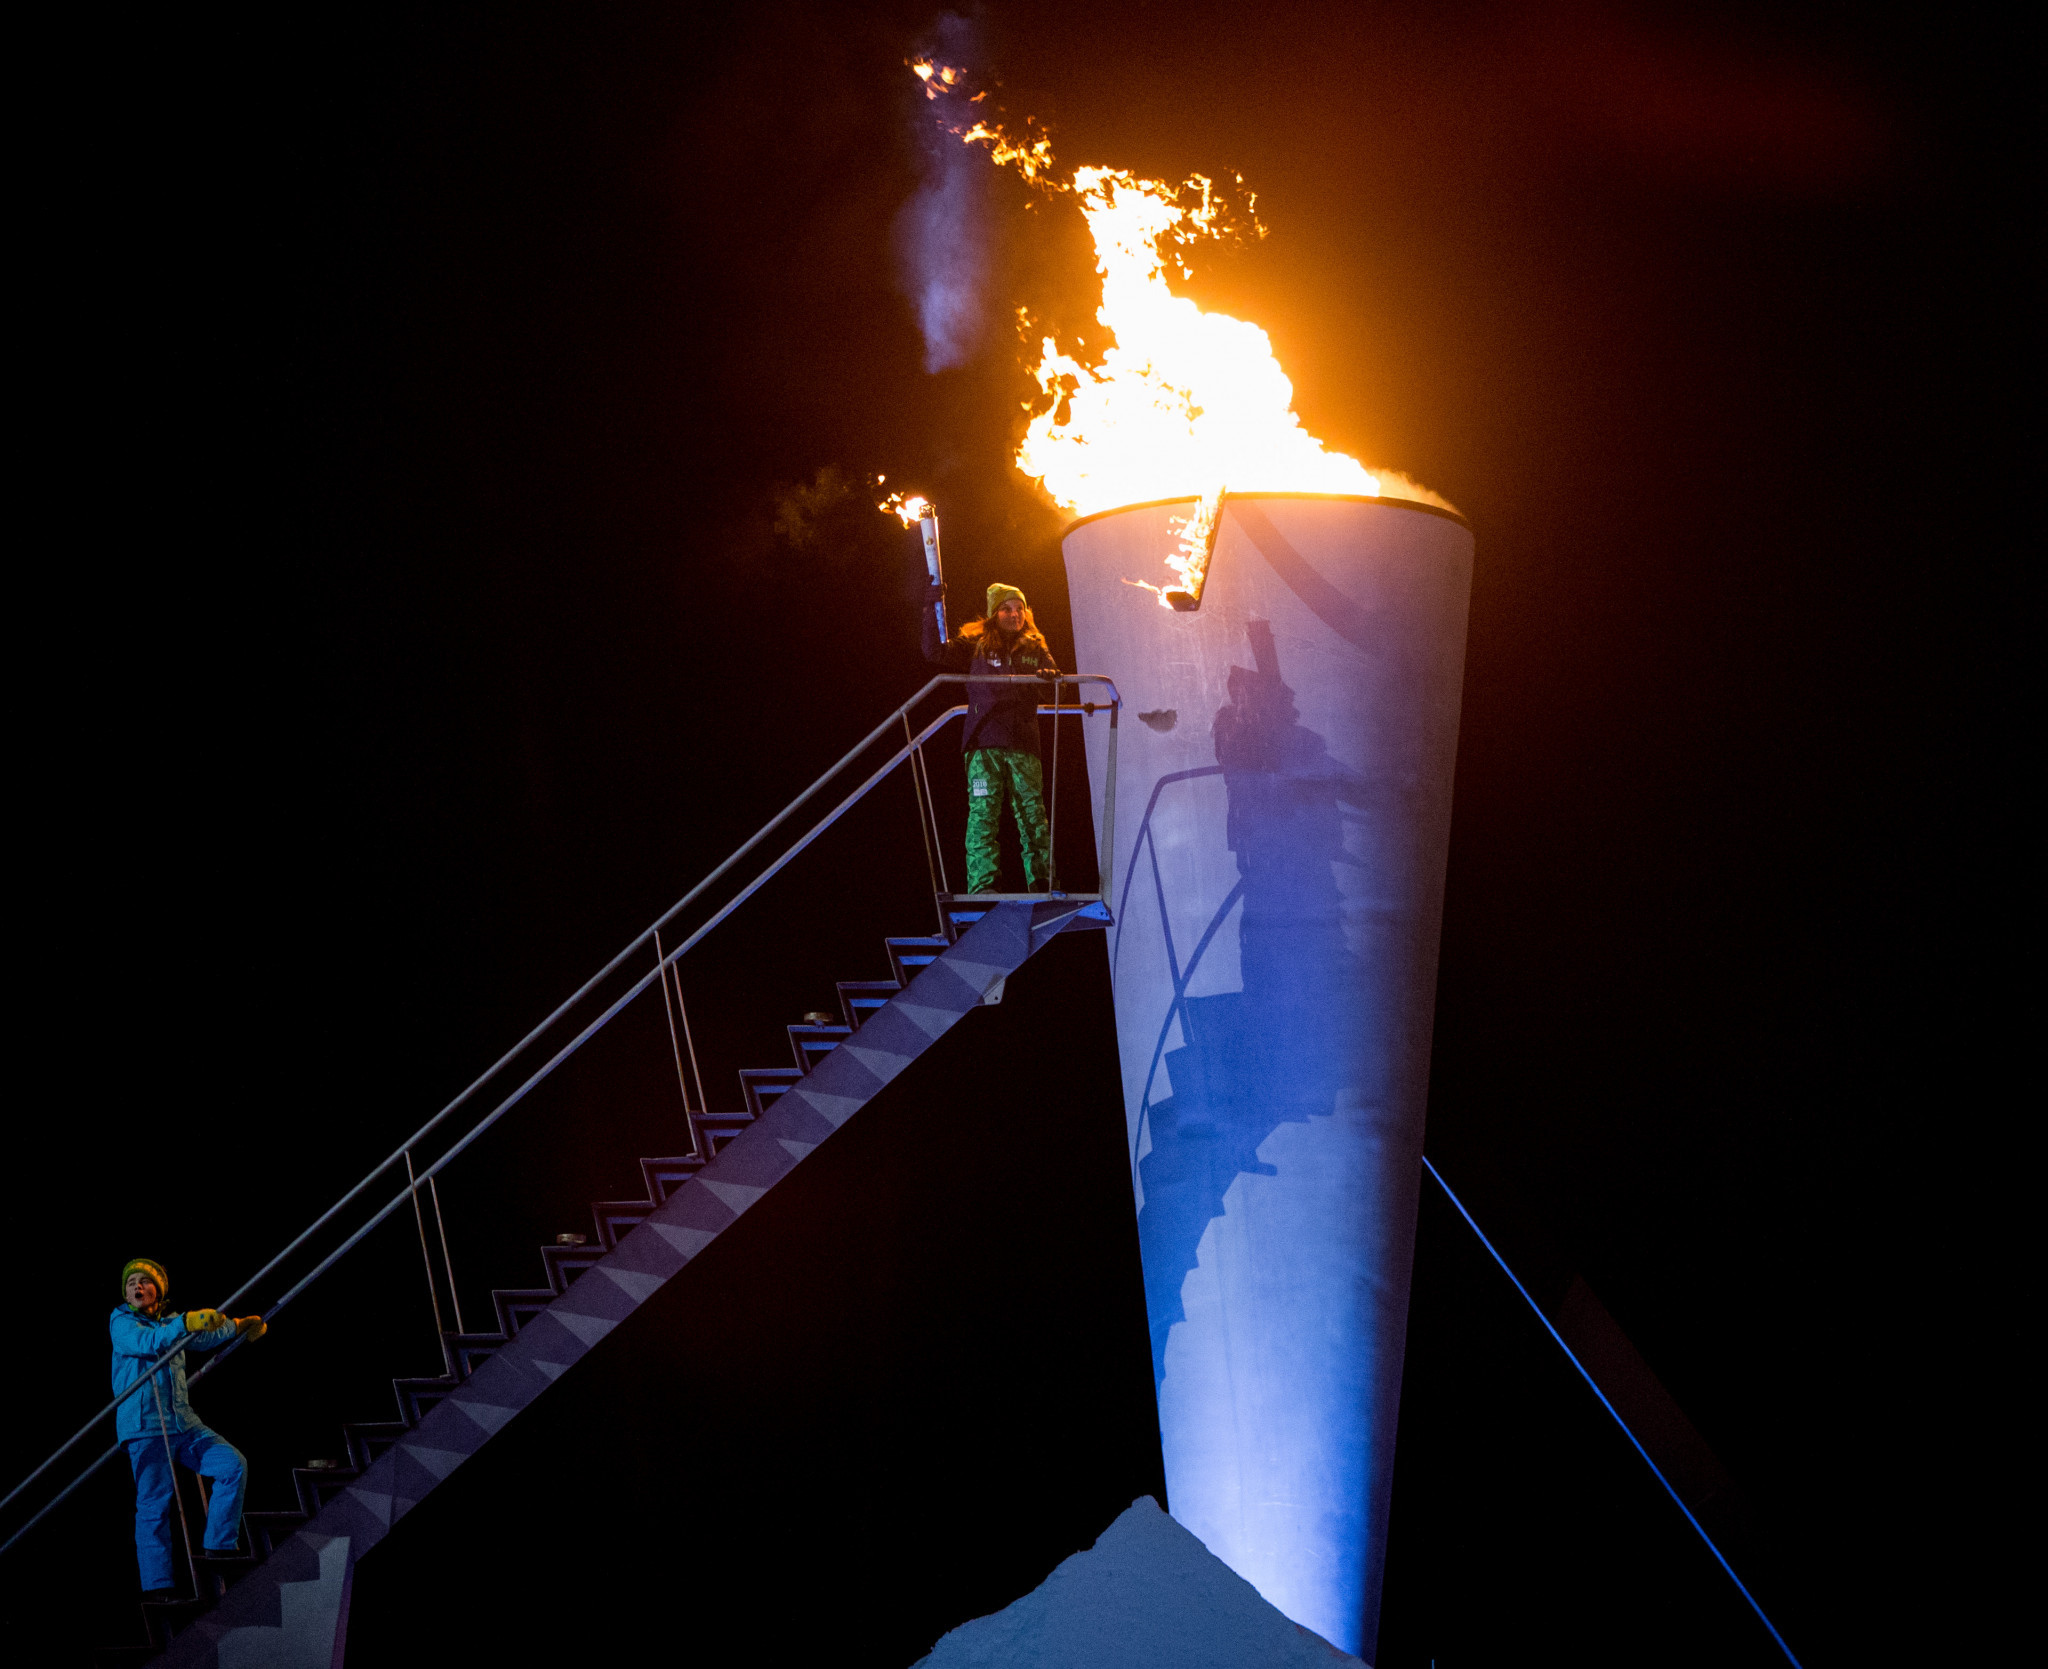 Princess Ingrid Alexander of Norway lit the Lillehammer 2016 flame ©Getty Images